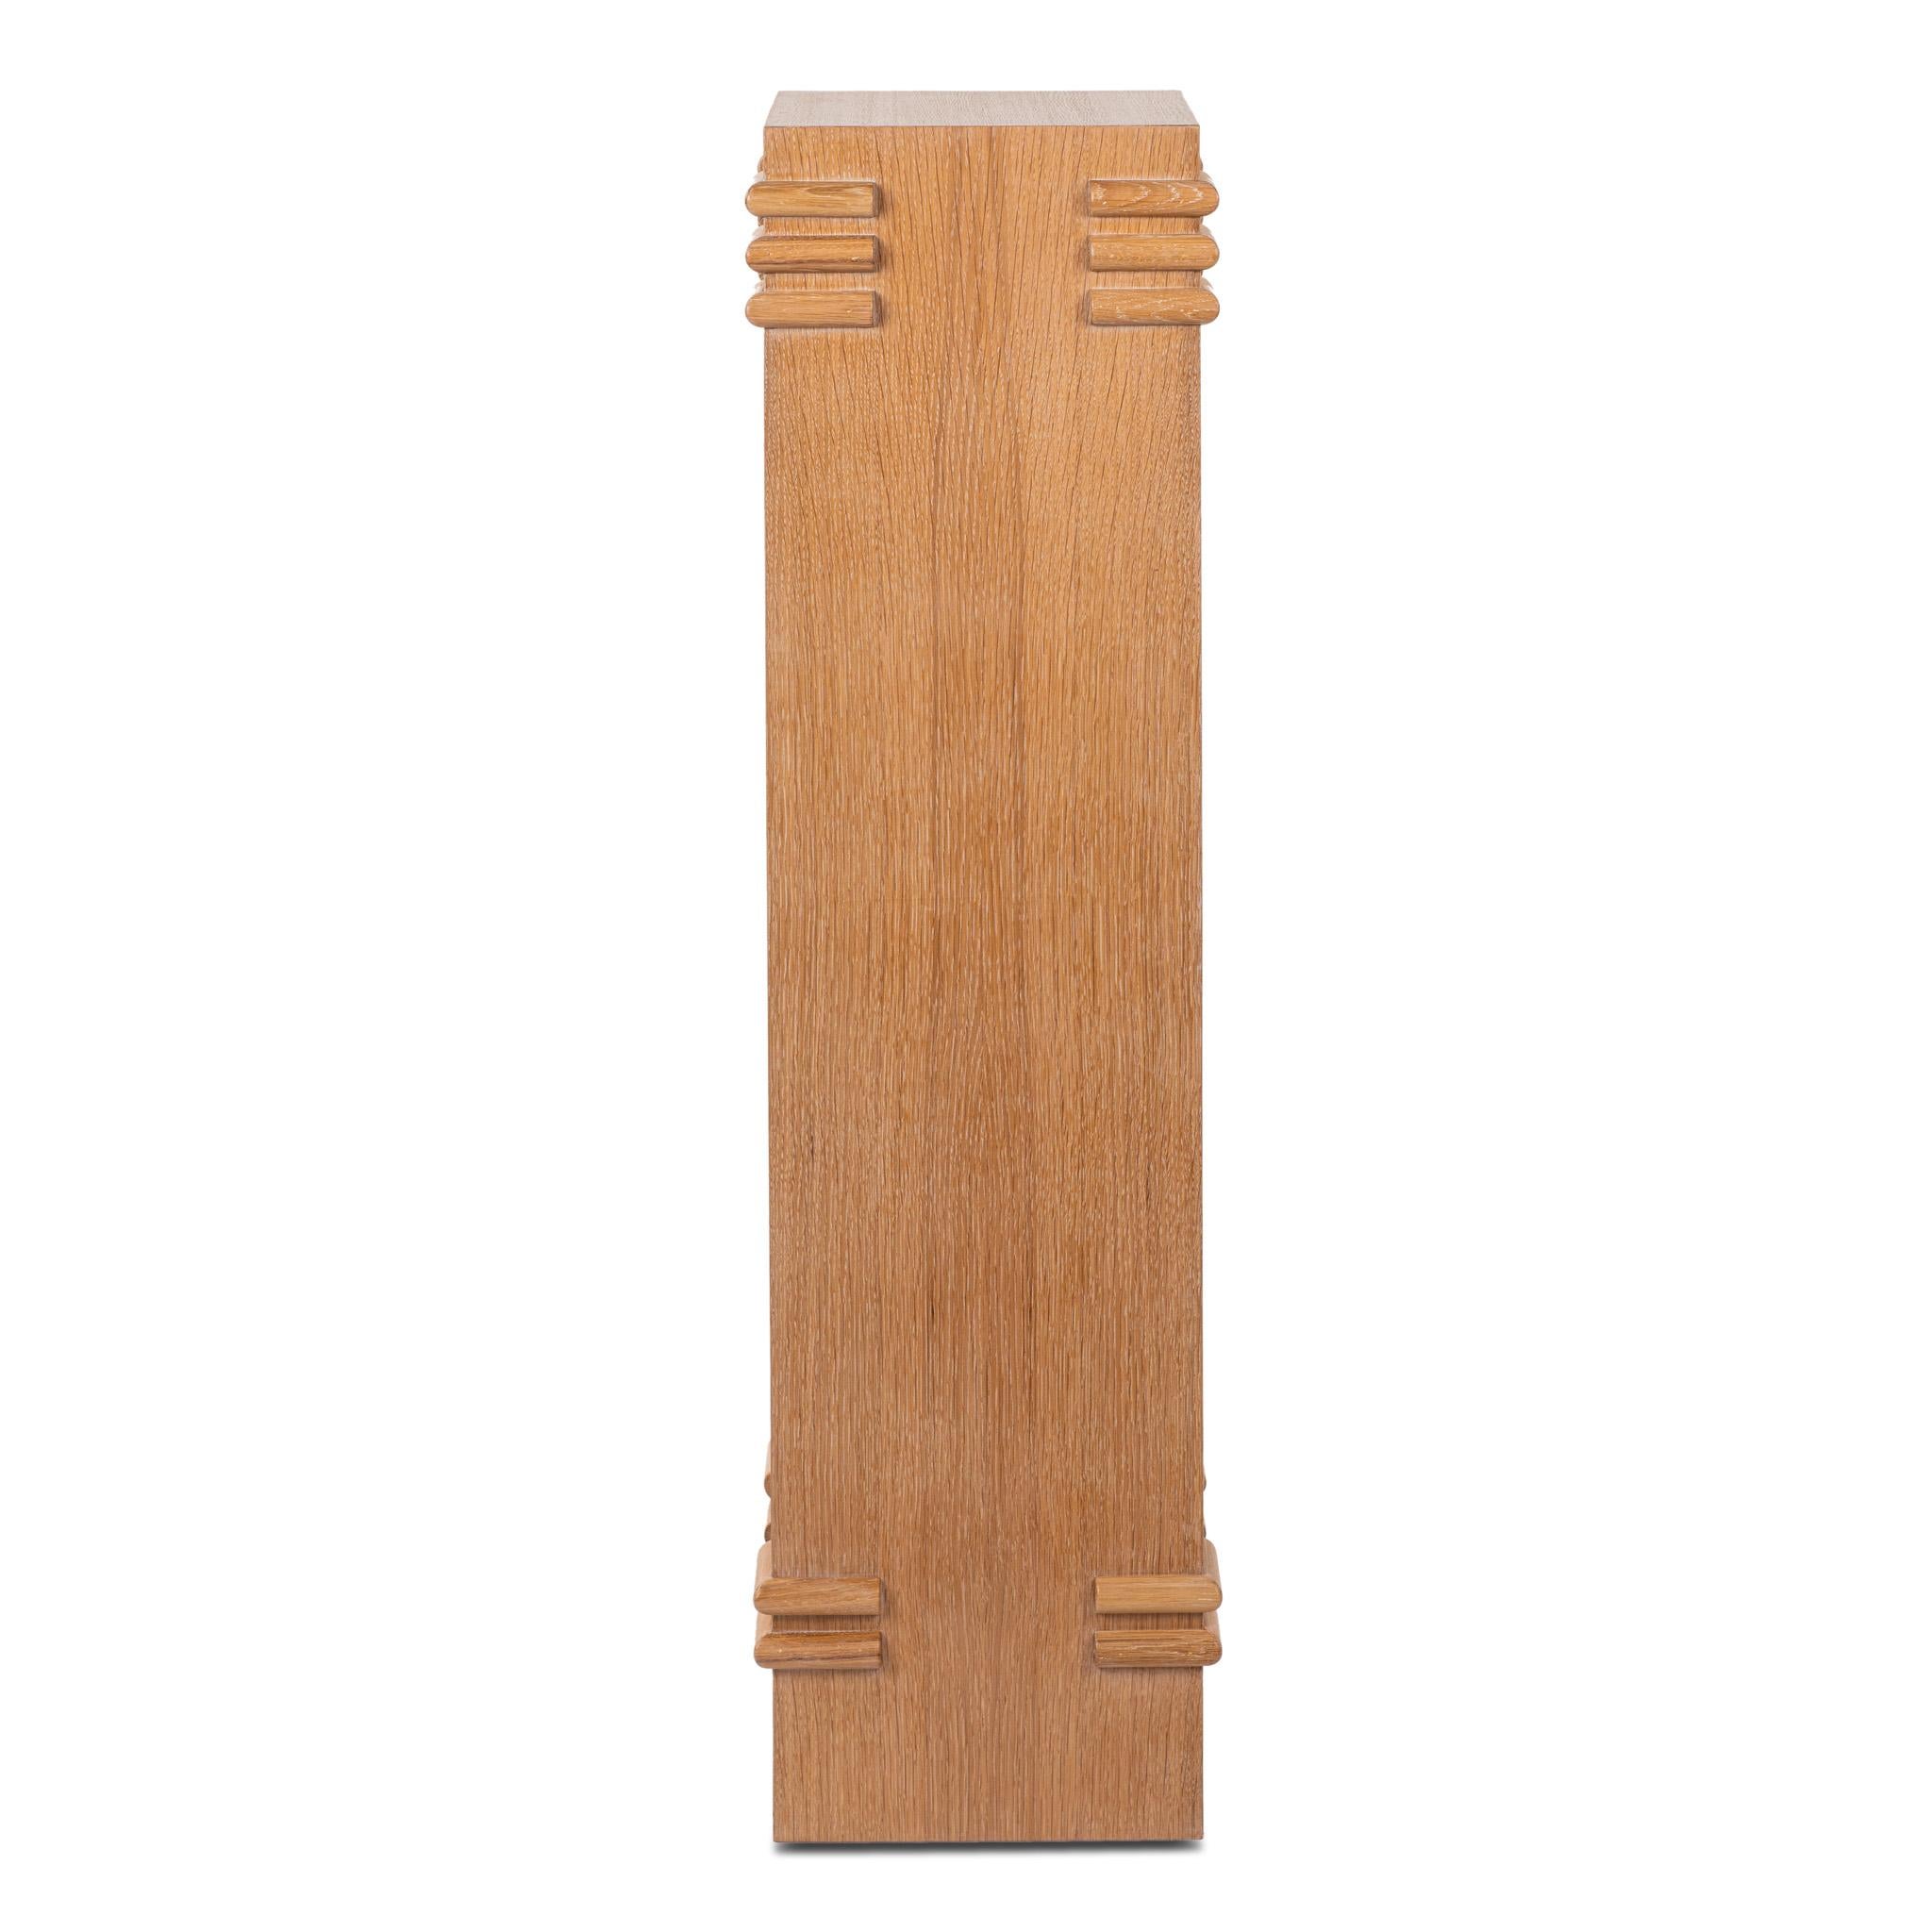 Designed by Josh Greene.
Square oak pedestal with rounded dowel applications. 